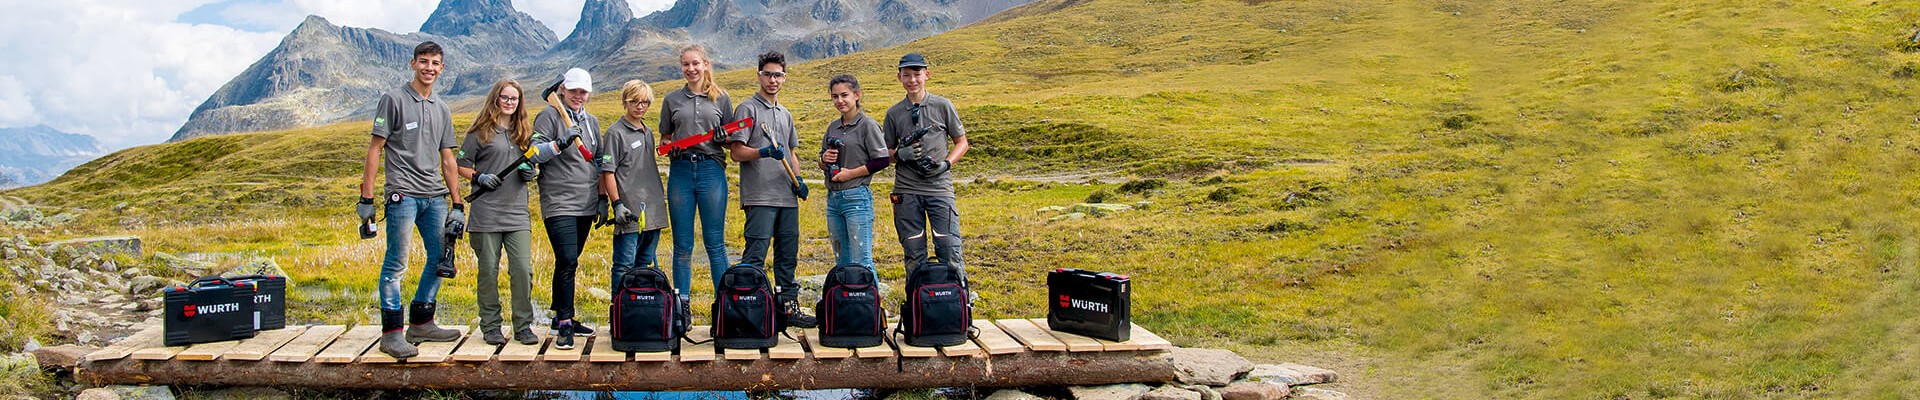 A career in the trades instead of university?  Career counseling at the “trades workshop” organized in a chalet in Austria’s Montafon valley is only one of the many educational  projects supported by Würth.